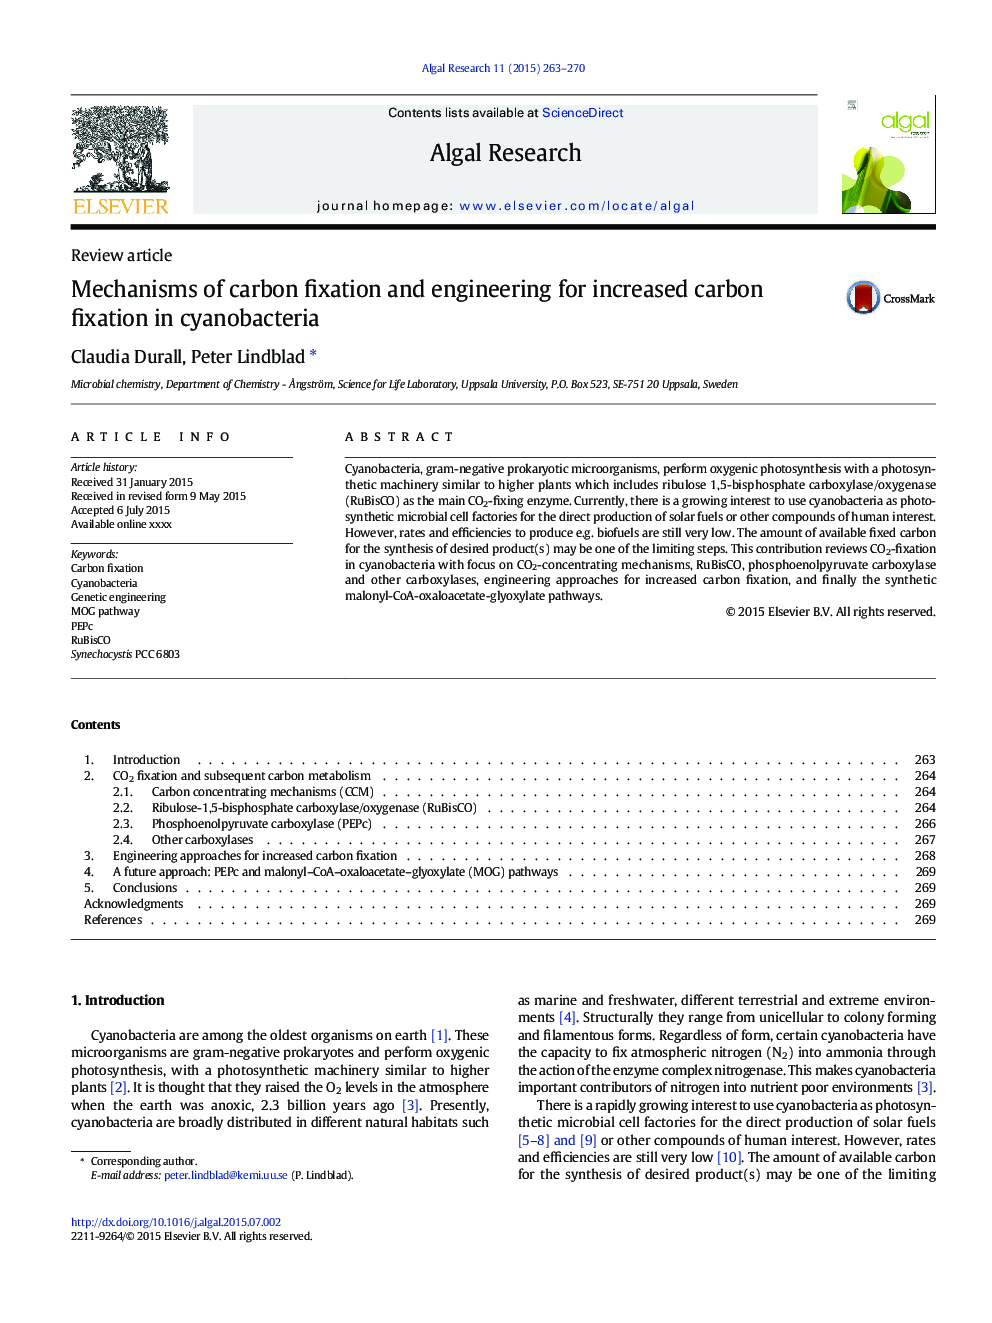 Mechanisms of carbon fixation and engineering for increased carbon fixation in cyanobacteria